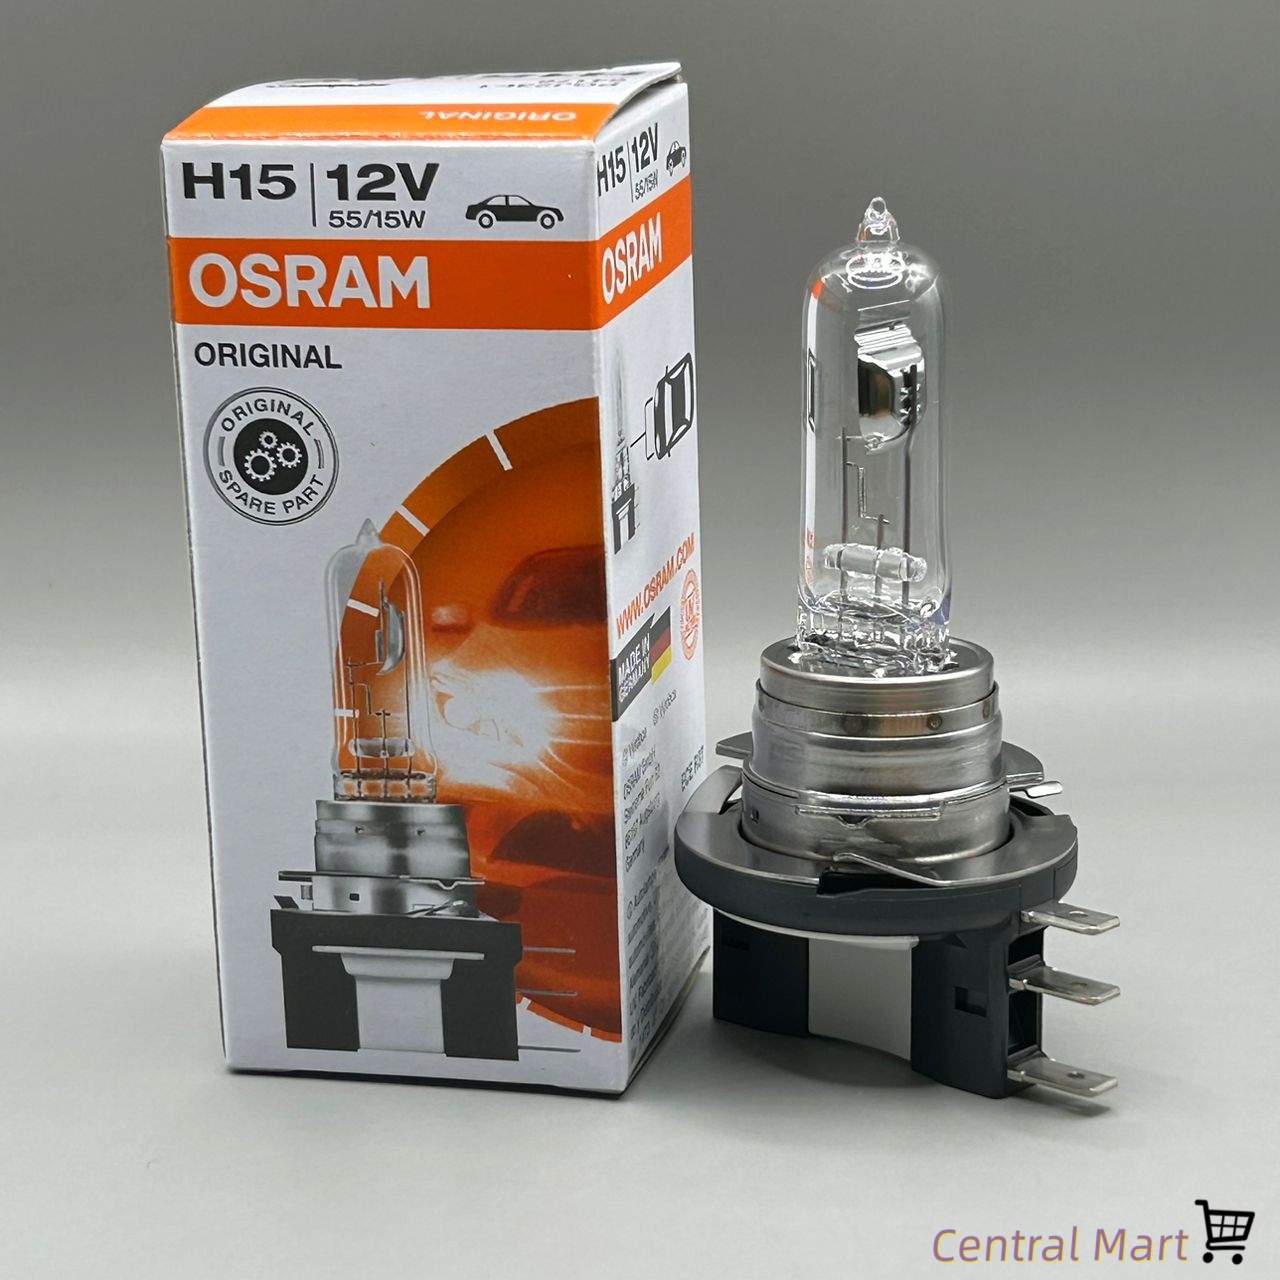 Original Osram H15 12V 55/15W - Halogen Bulb for Ford Ranger, VW Golf, Audi  A3/A5, Mazda 3 and Mercedes C and S Class Made in Germany